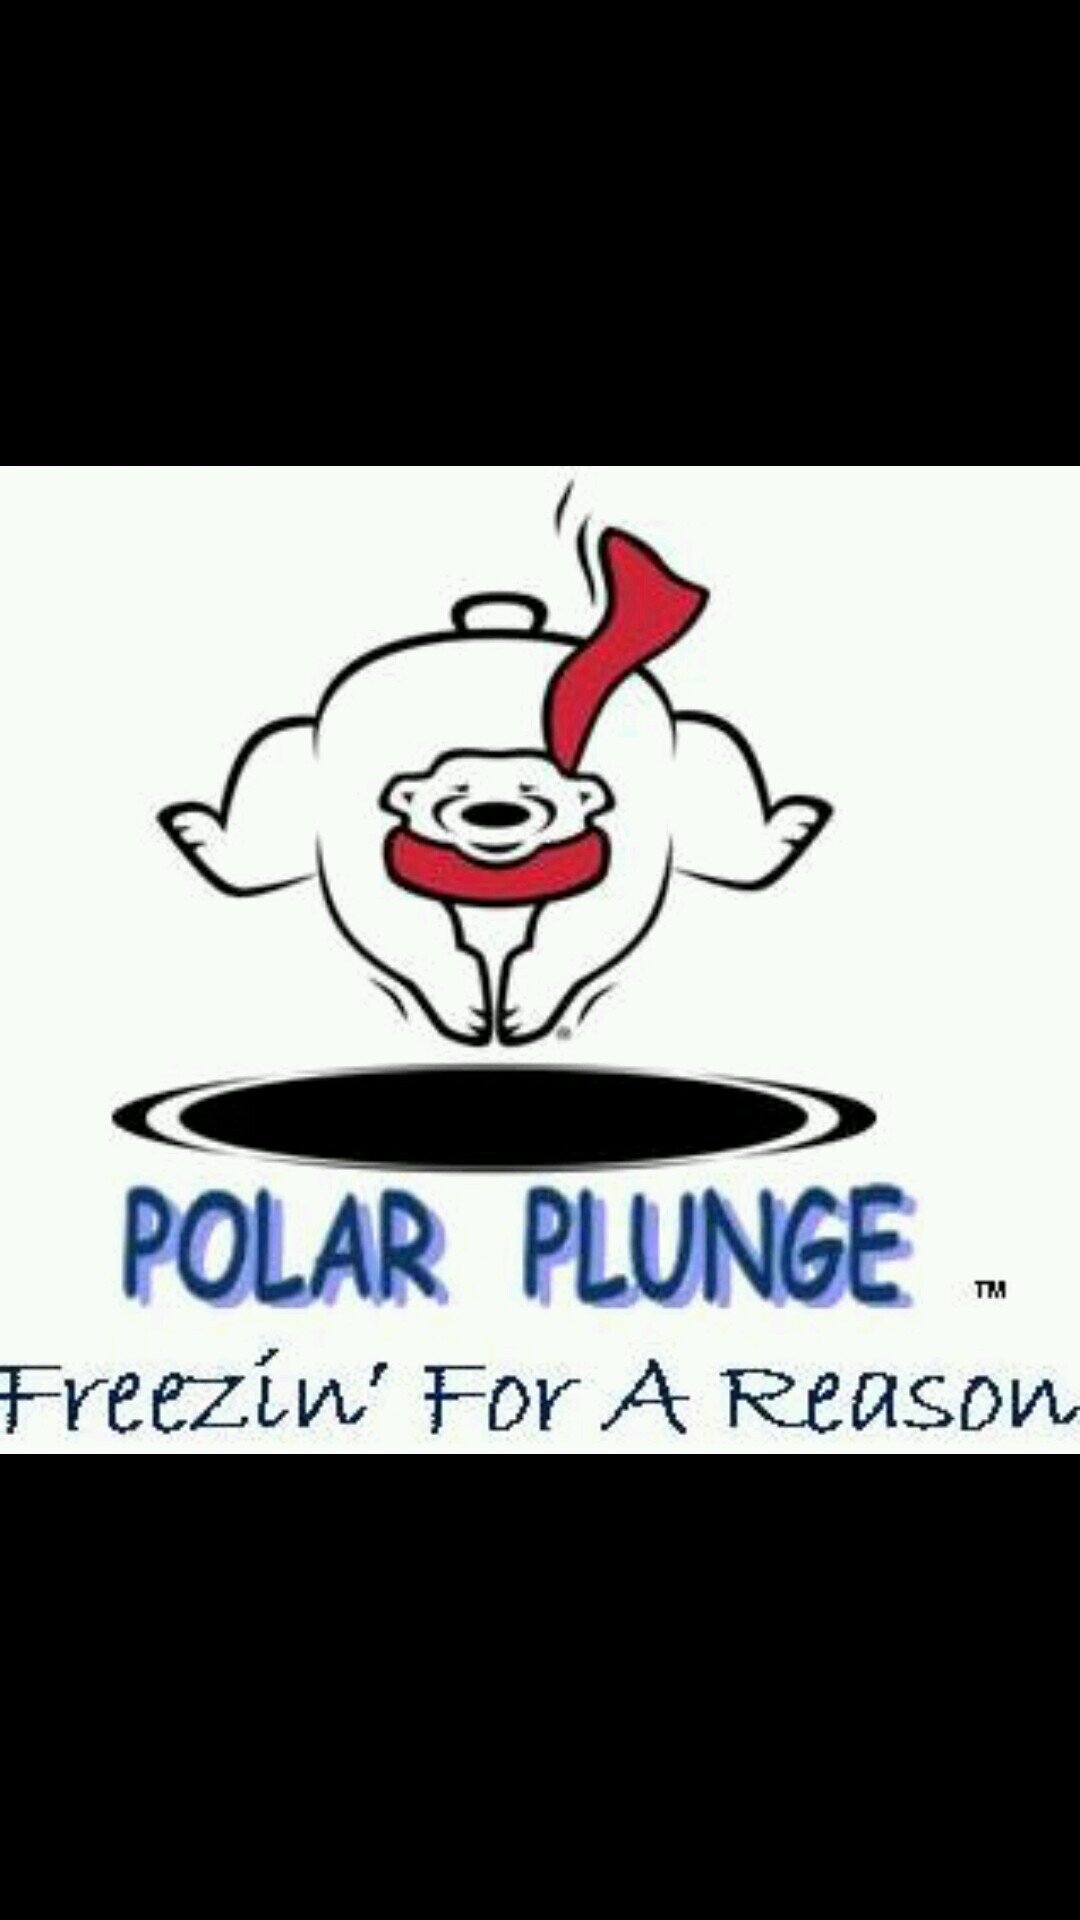 step out of your comfort zone! if you have questions or concerns, DM me. #freezinforareason #polarplunge